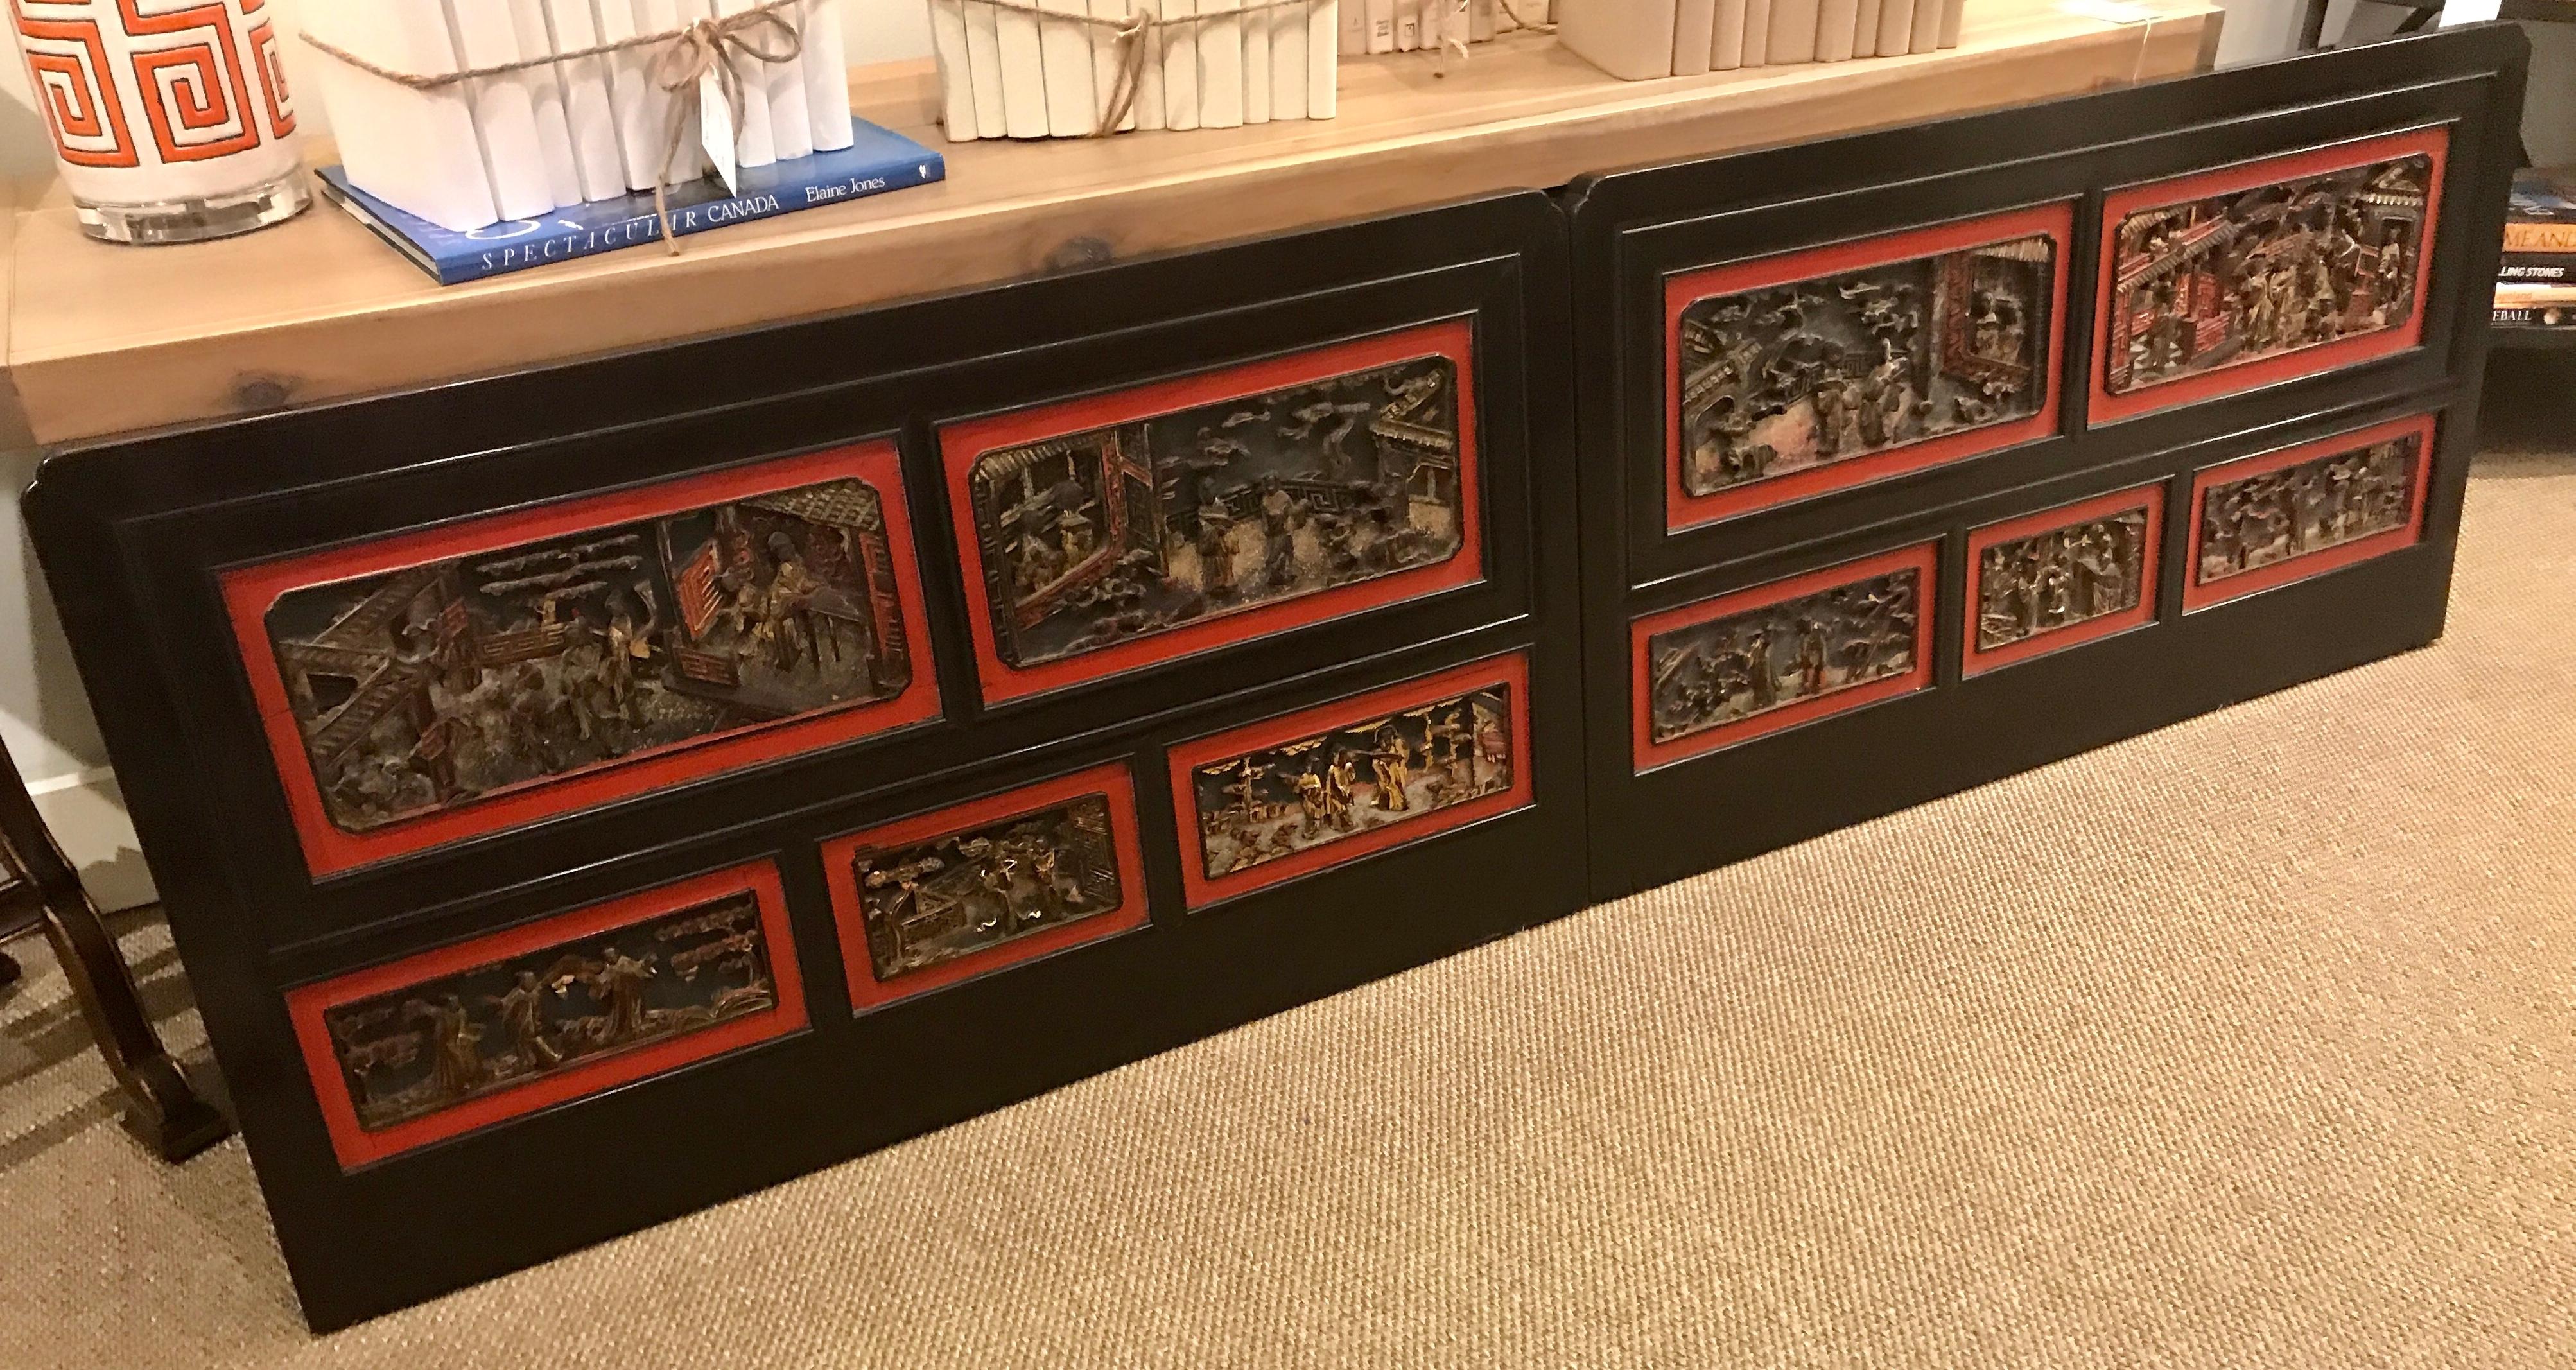 Pair of late 19th century Chinese carved panels/ twin headboards
Each one finely carved with five inset carved giltwood court and landscape scenes, with iron red lacquer surround.
Previously used as twin head boards, can be used above doors or any